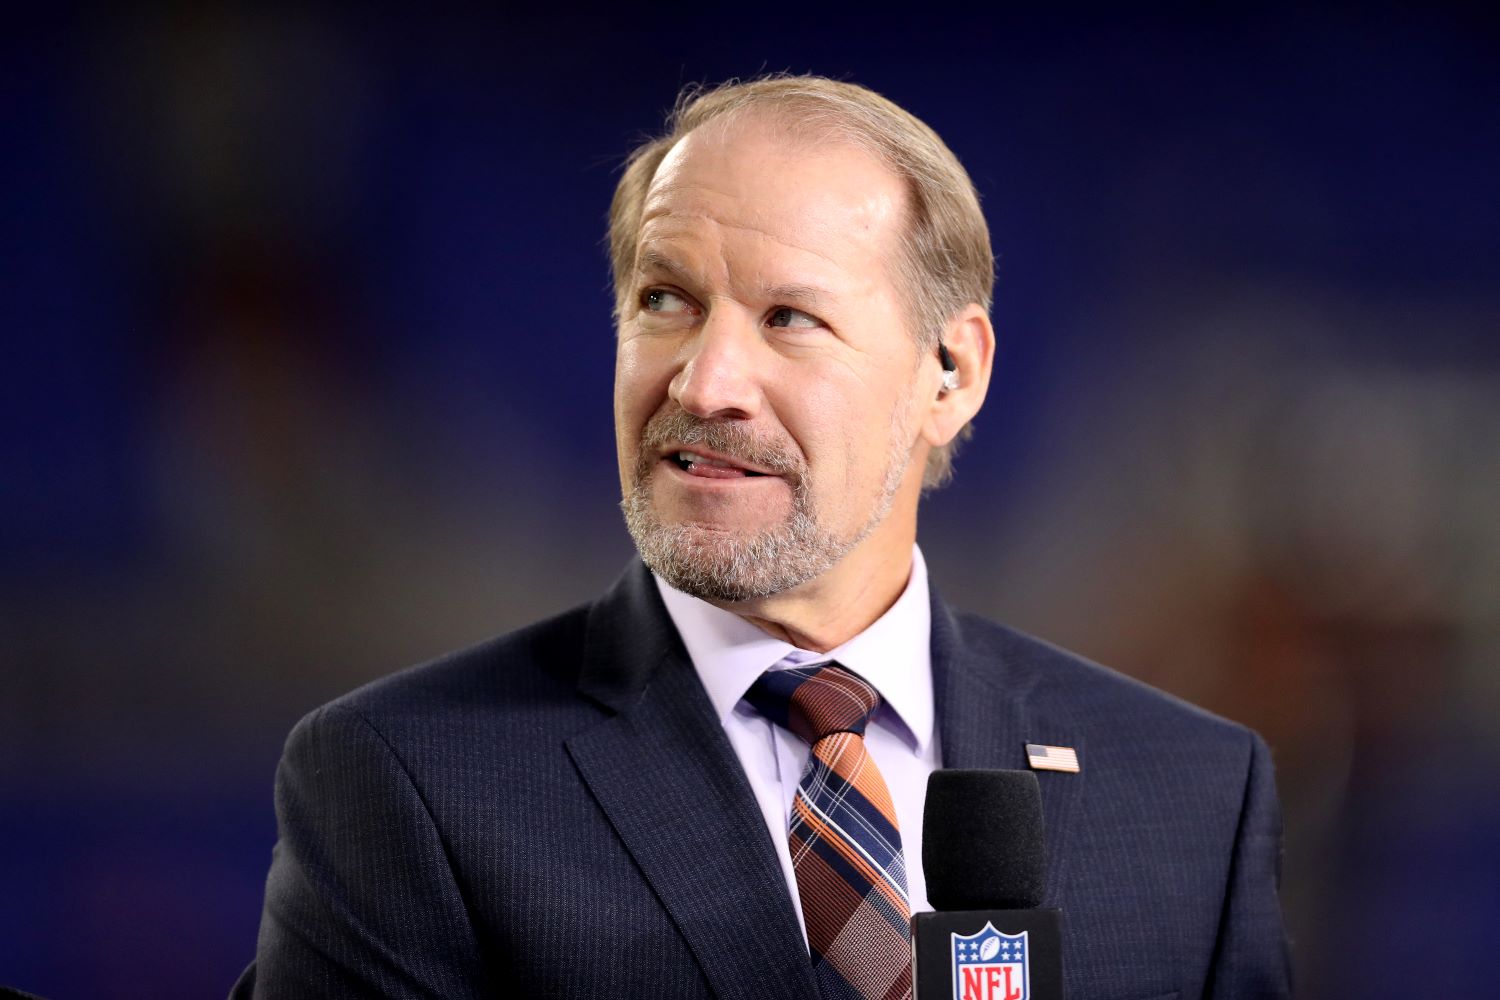 With rumors swirling about a potential return to the sidelines, Steelers icon Bill Cowher sent a crystal clear message about coaching again.